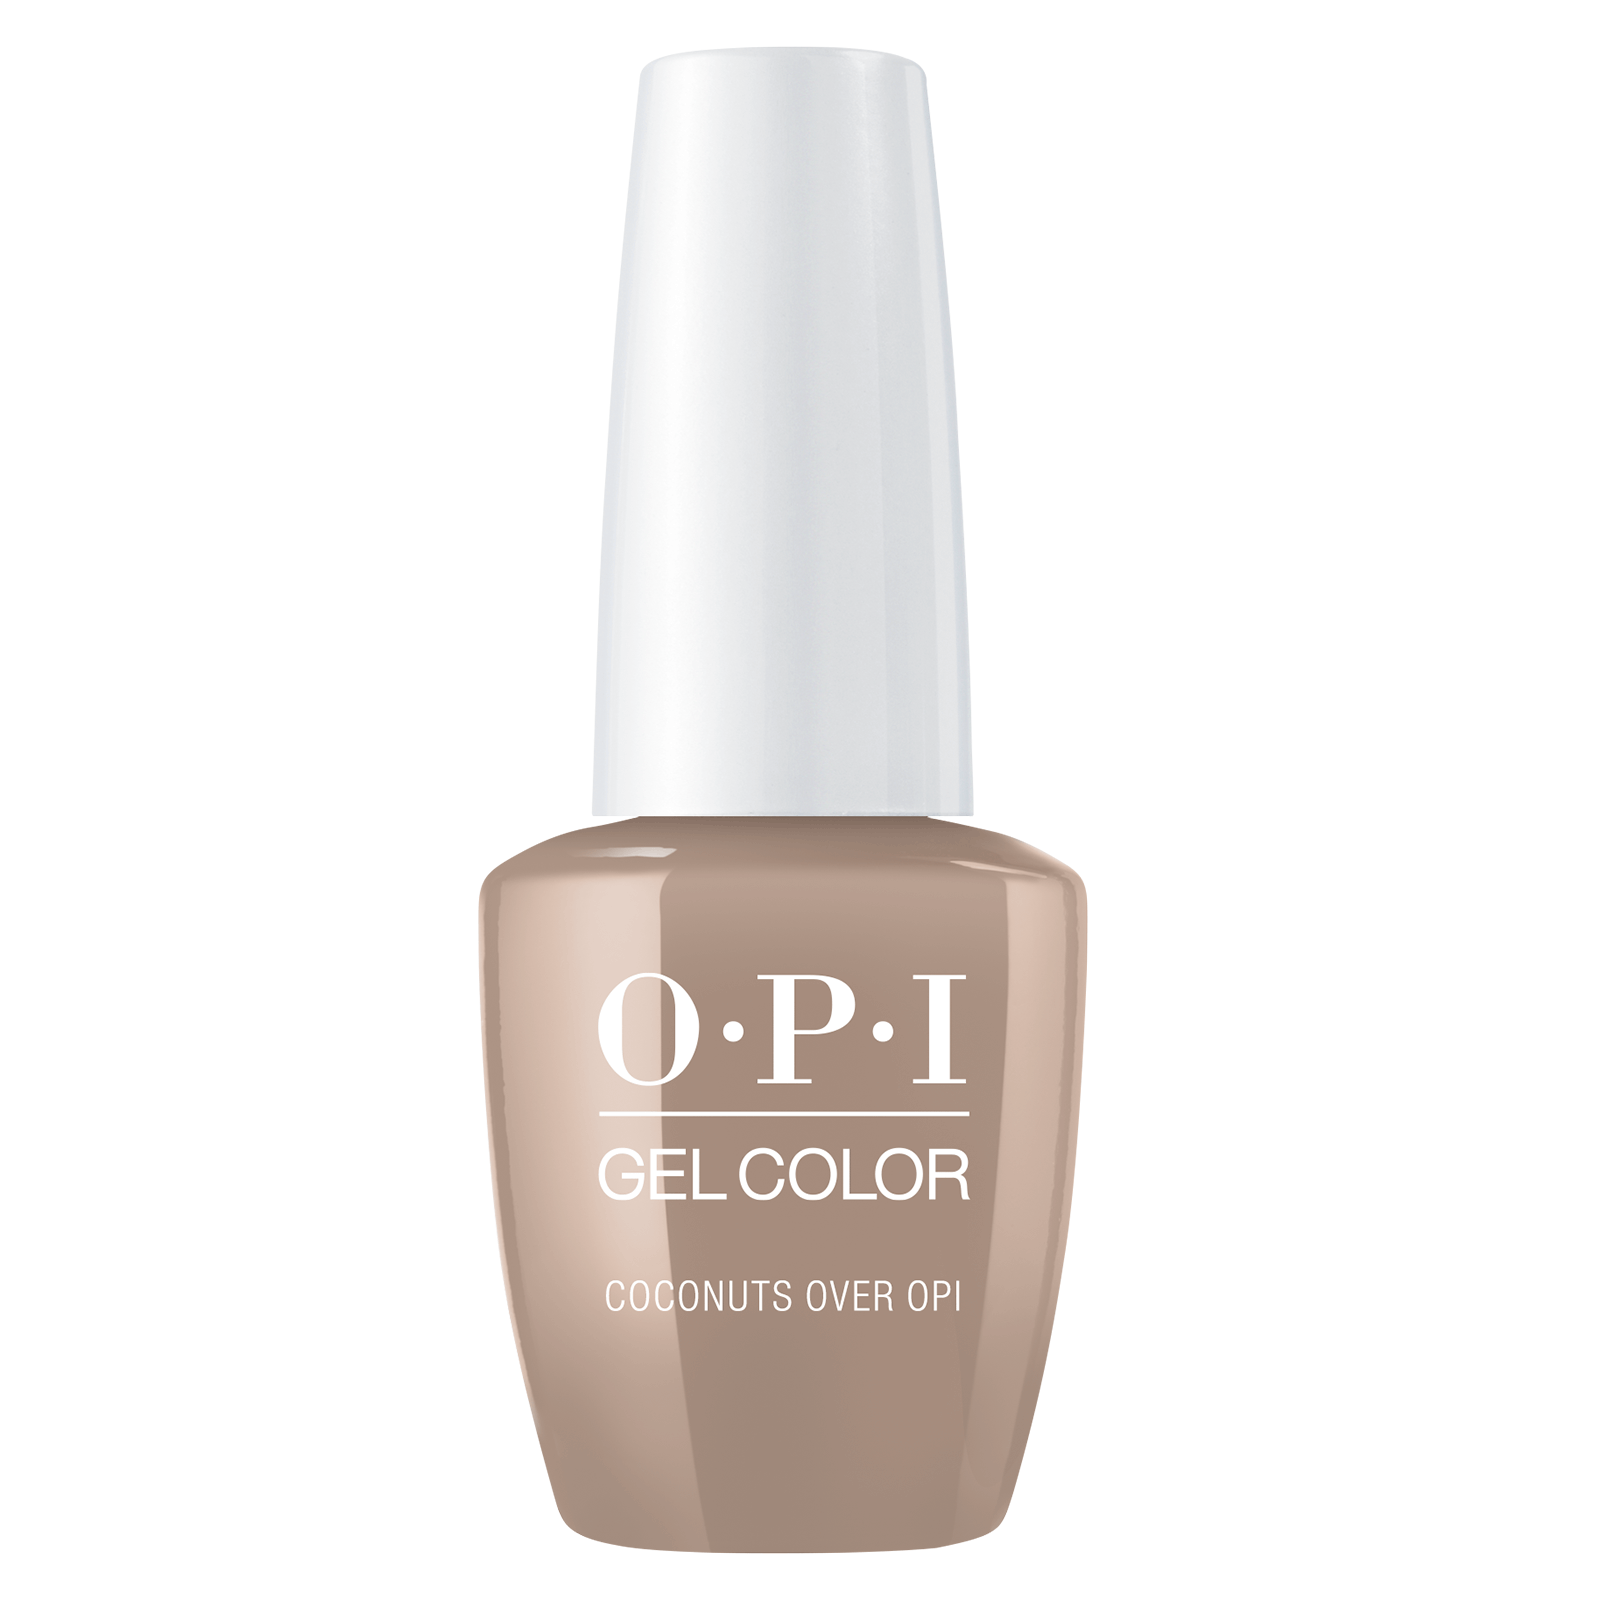 Gelcolor Coconuts Over Opi Opi Cosmoprof